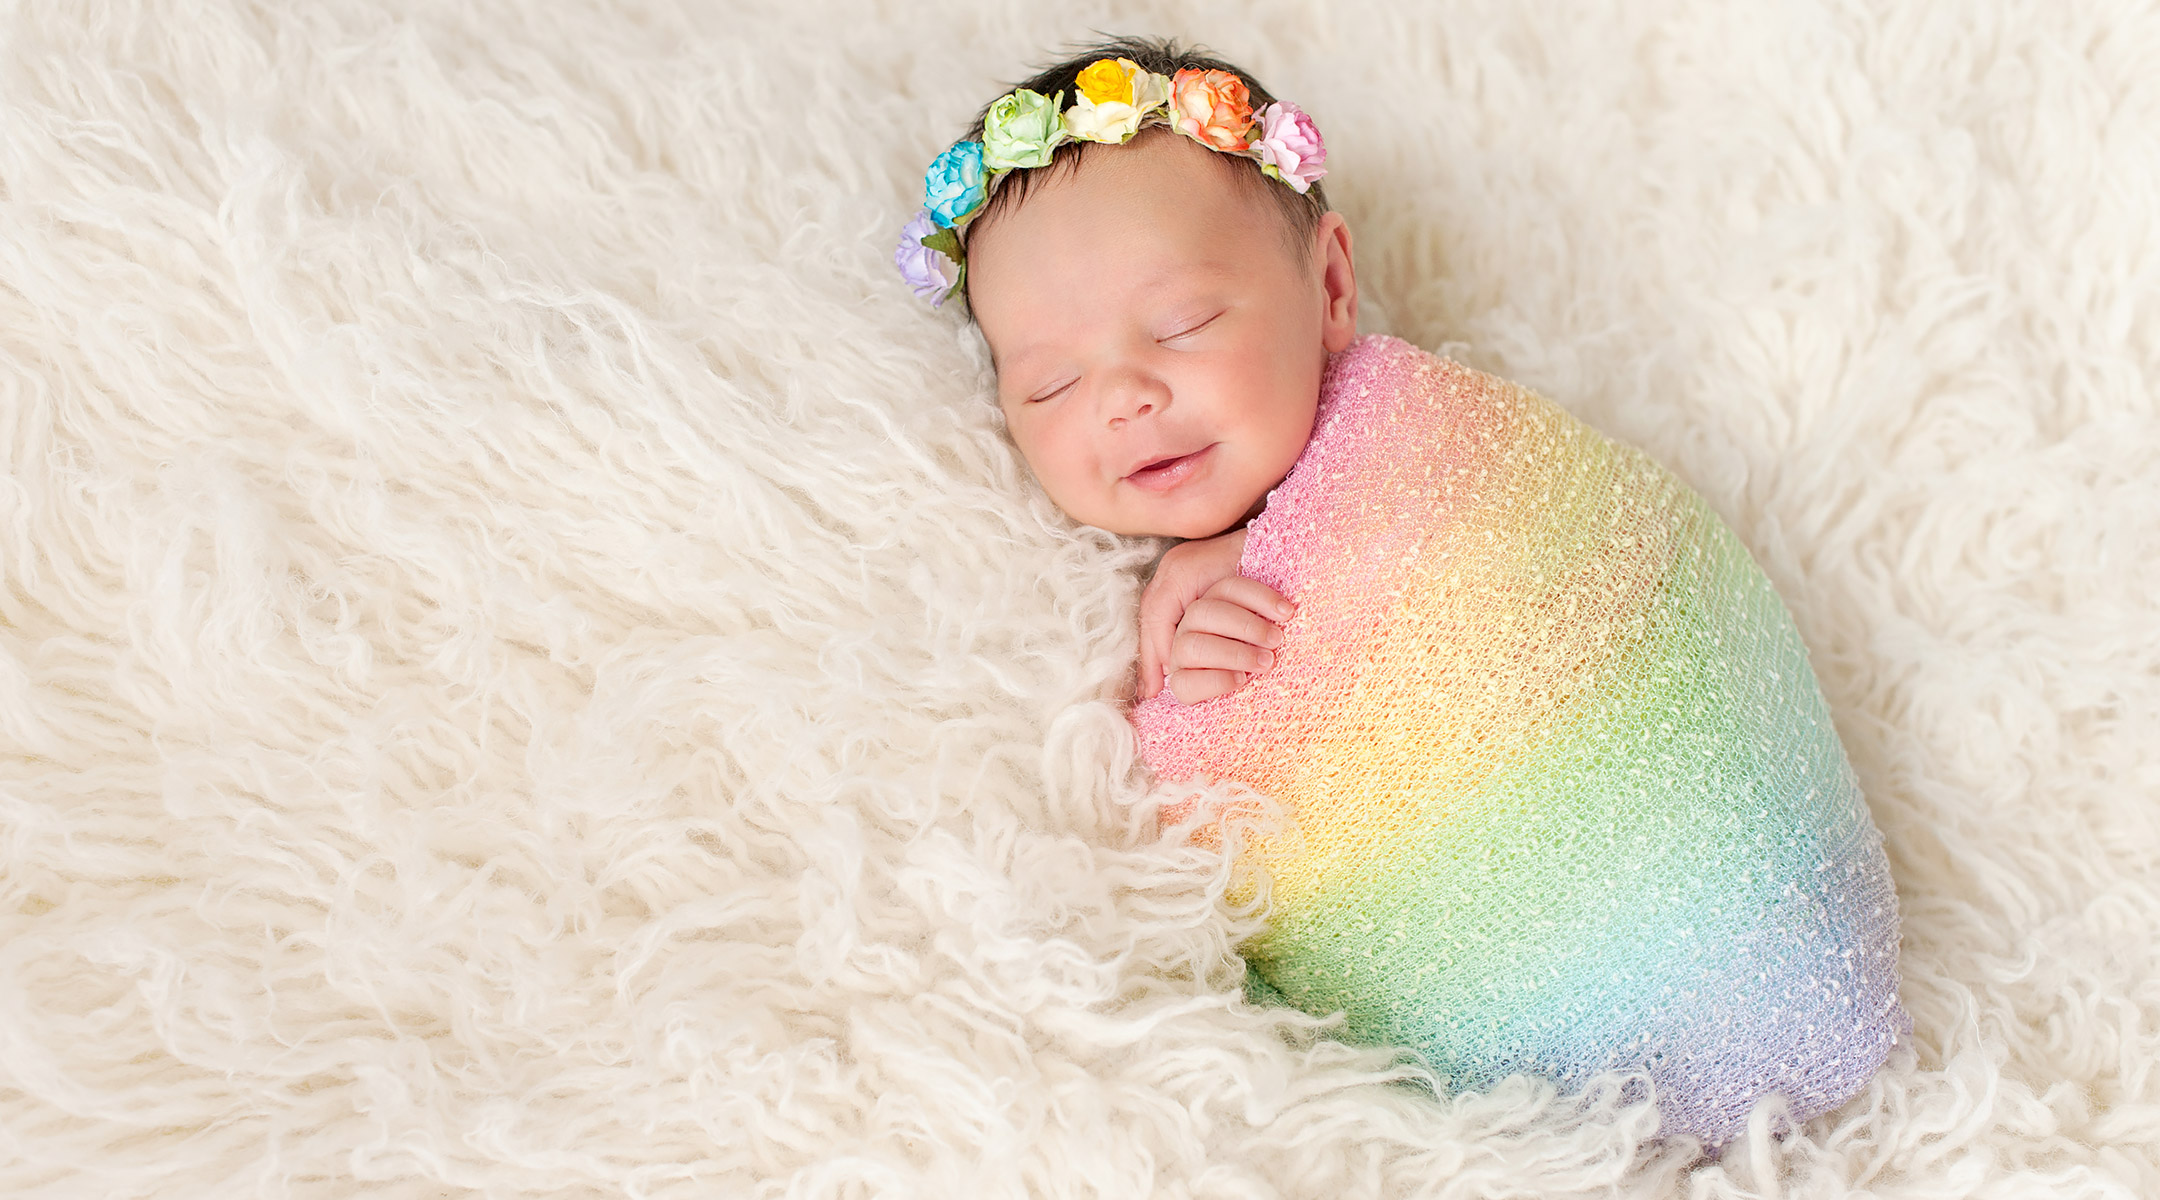 Rainbow Baby: Definition and Personal Stories